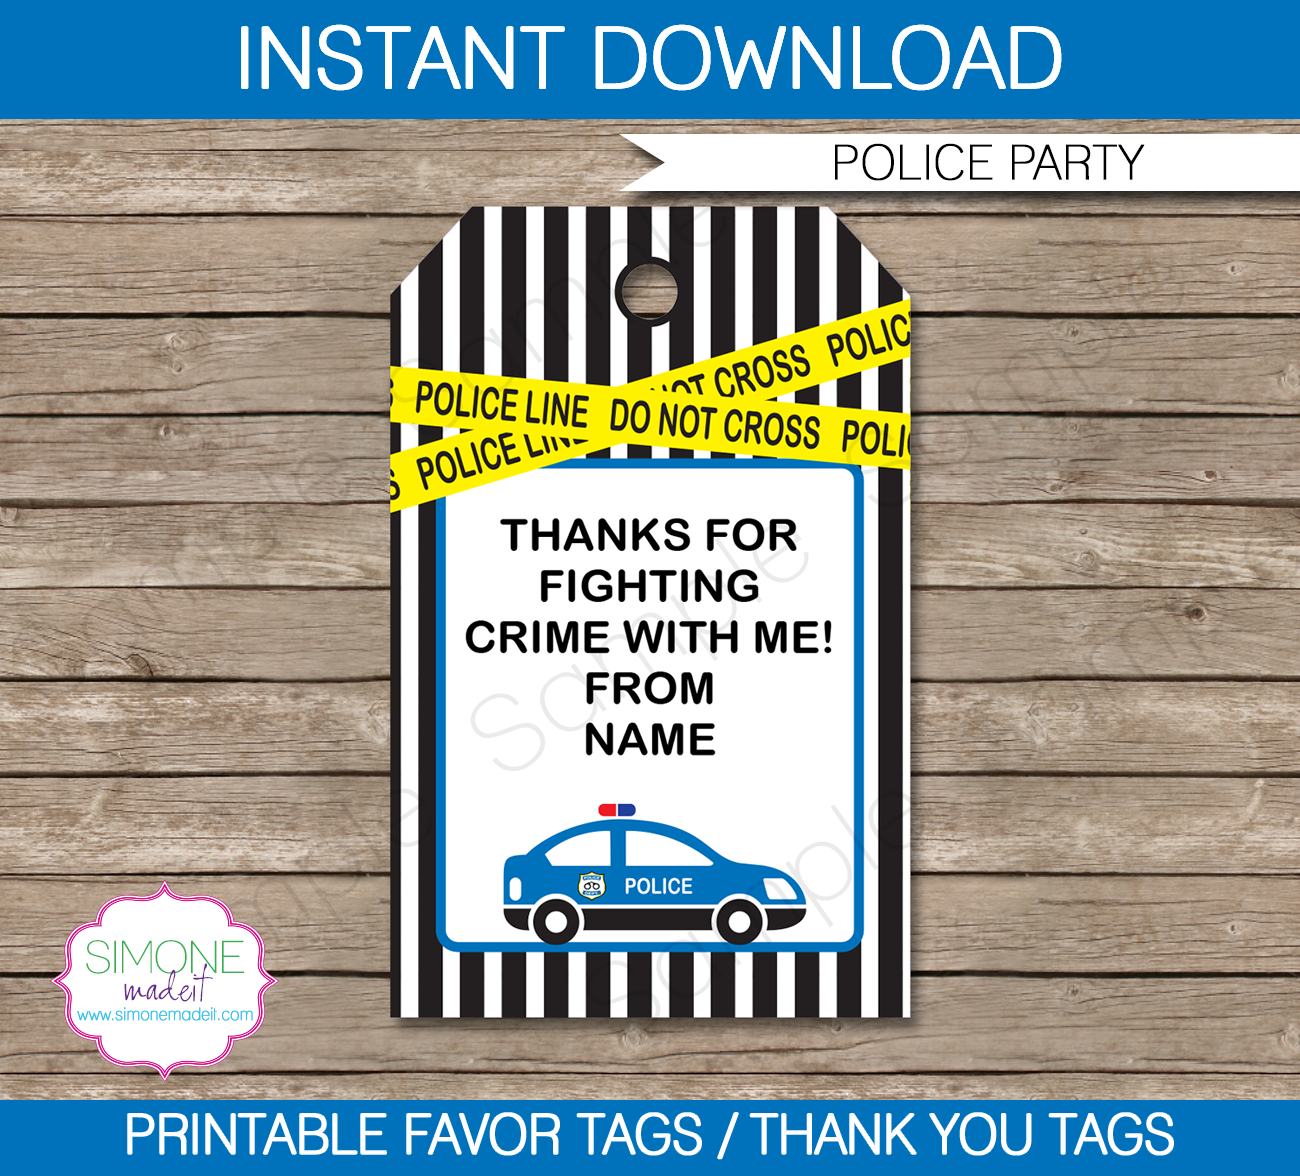 Police Party Favor Tags | Thank You Tags | Birthday Party | Editable DIY Template | $3.00 INSTANT DOWNLOAD via SIMONEmadeit.com